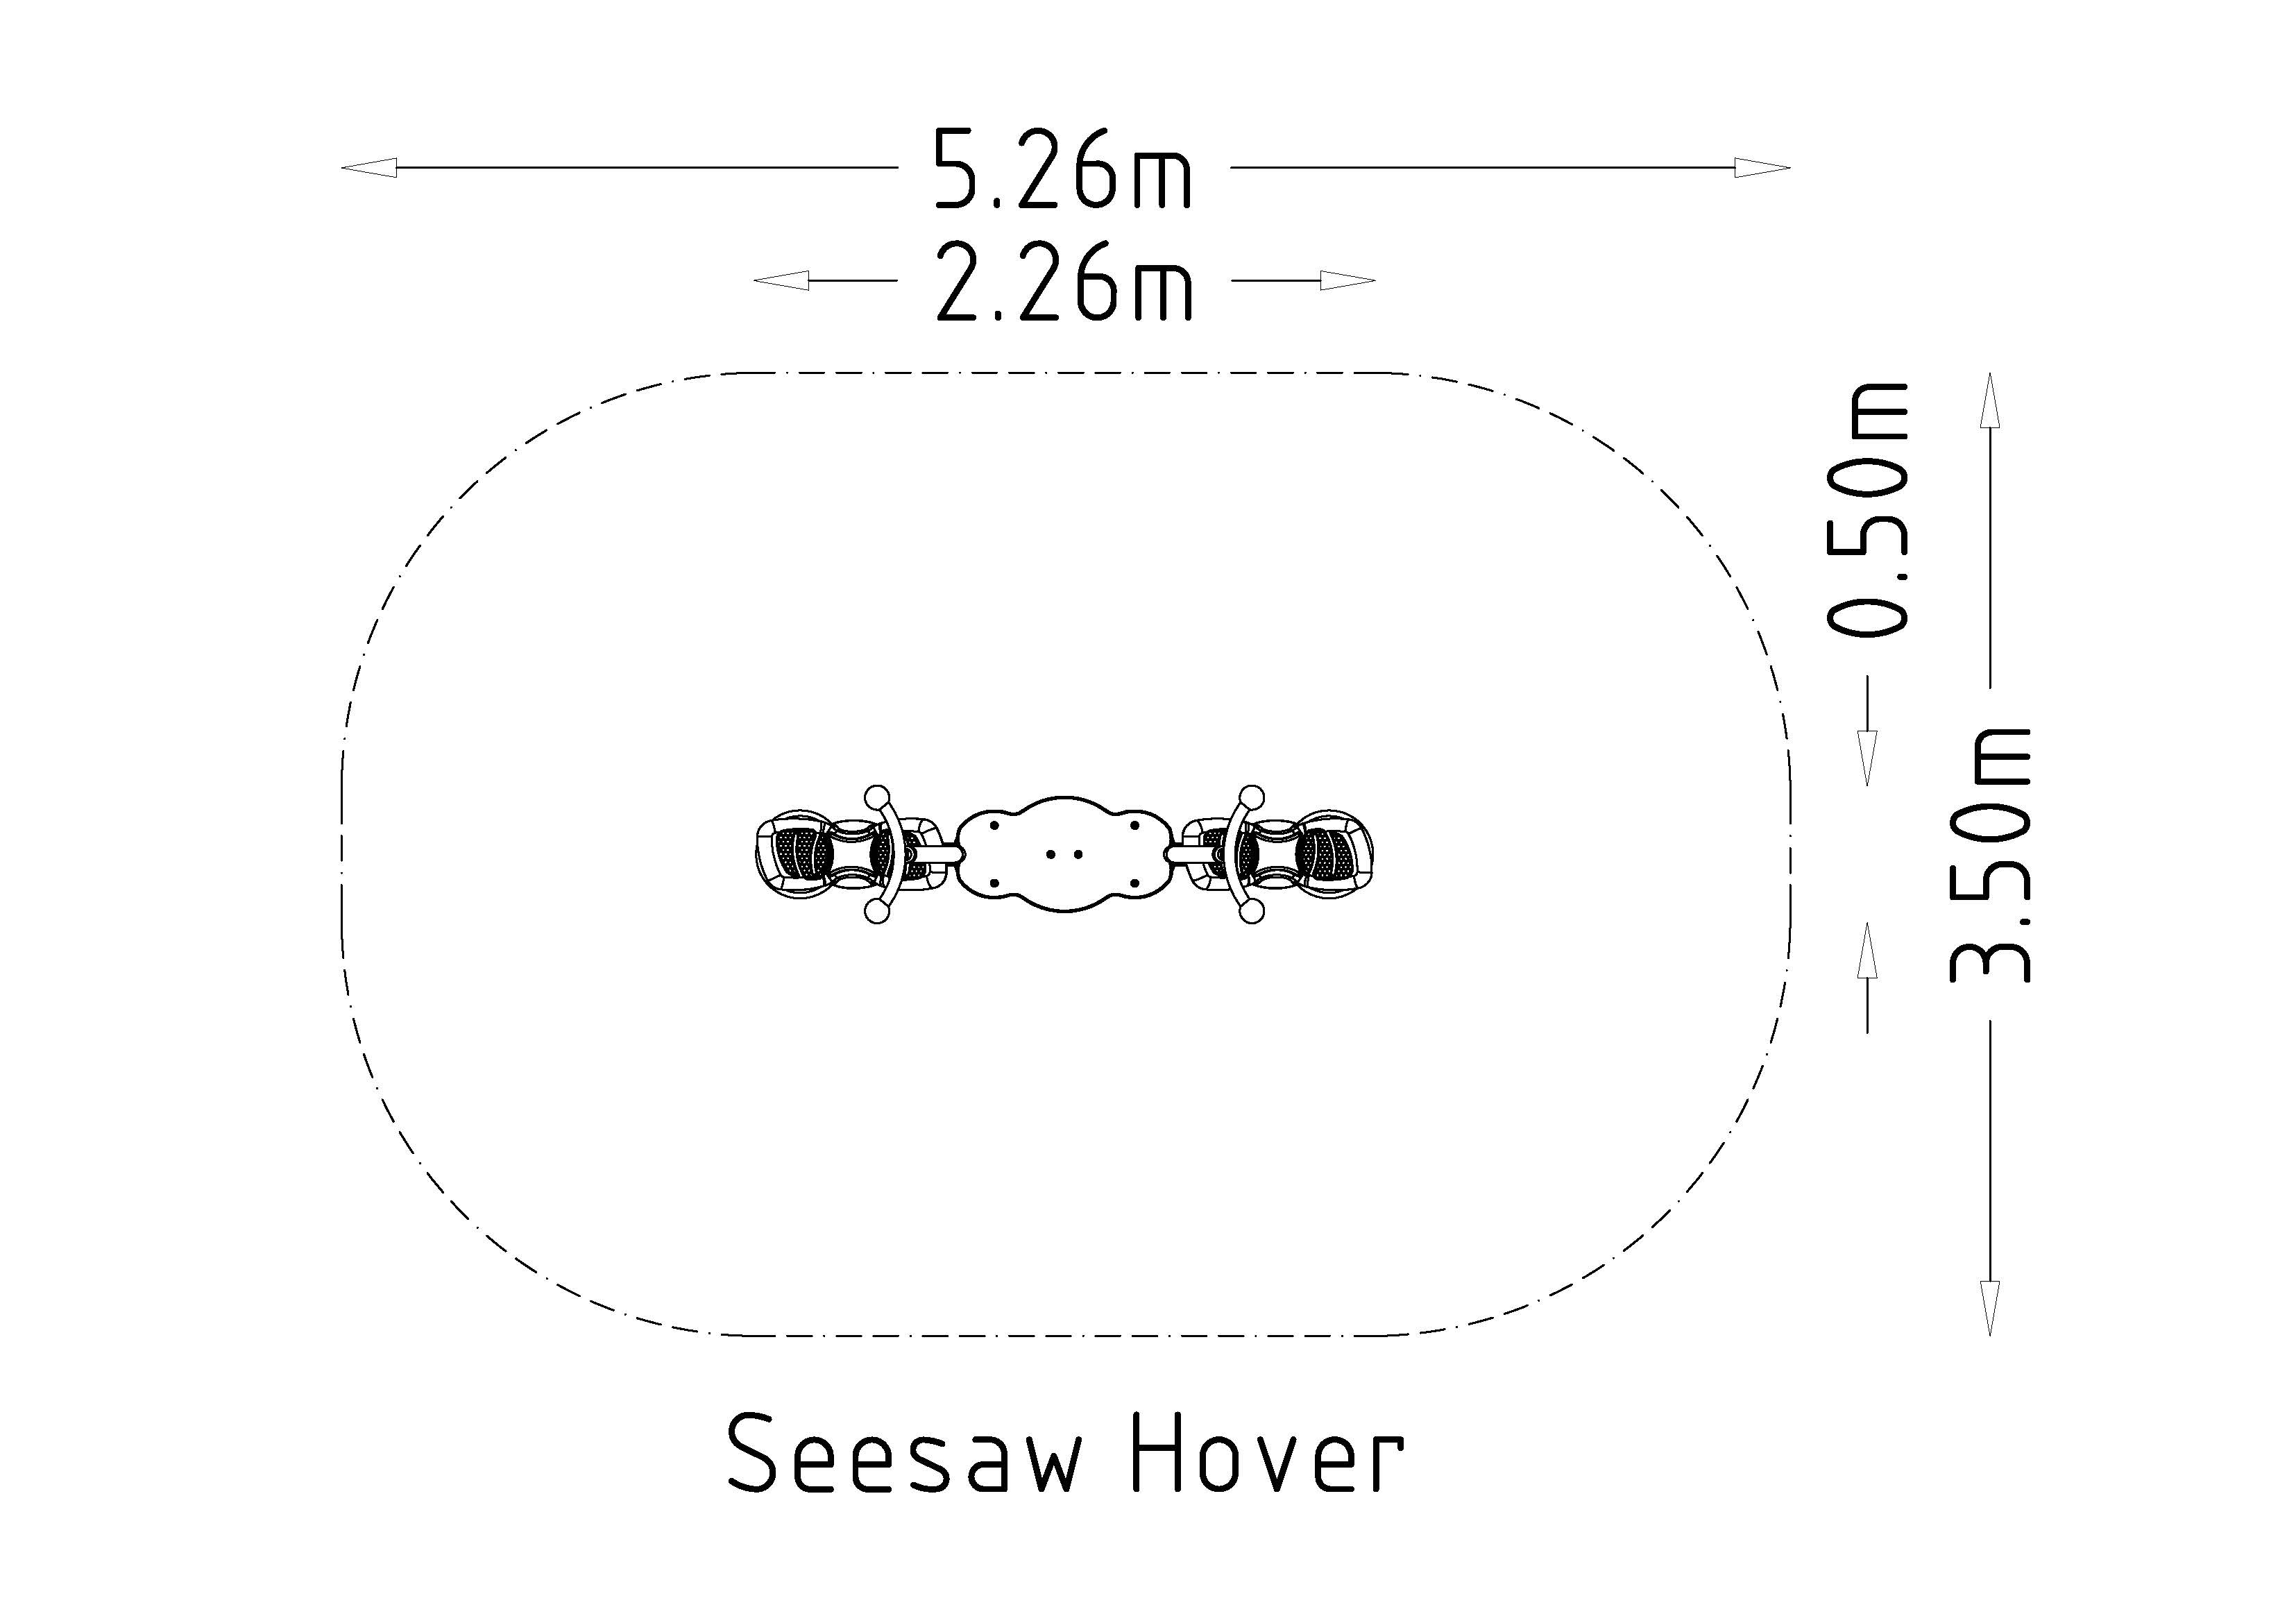 Seesaw Hover